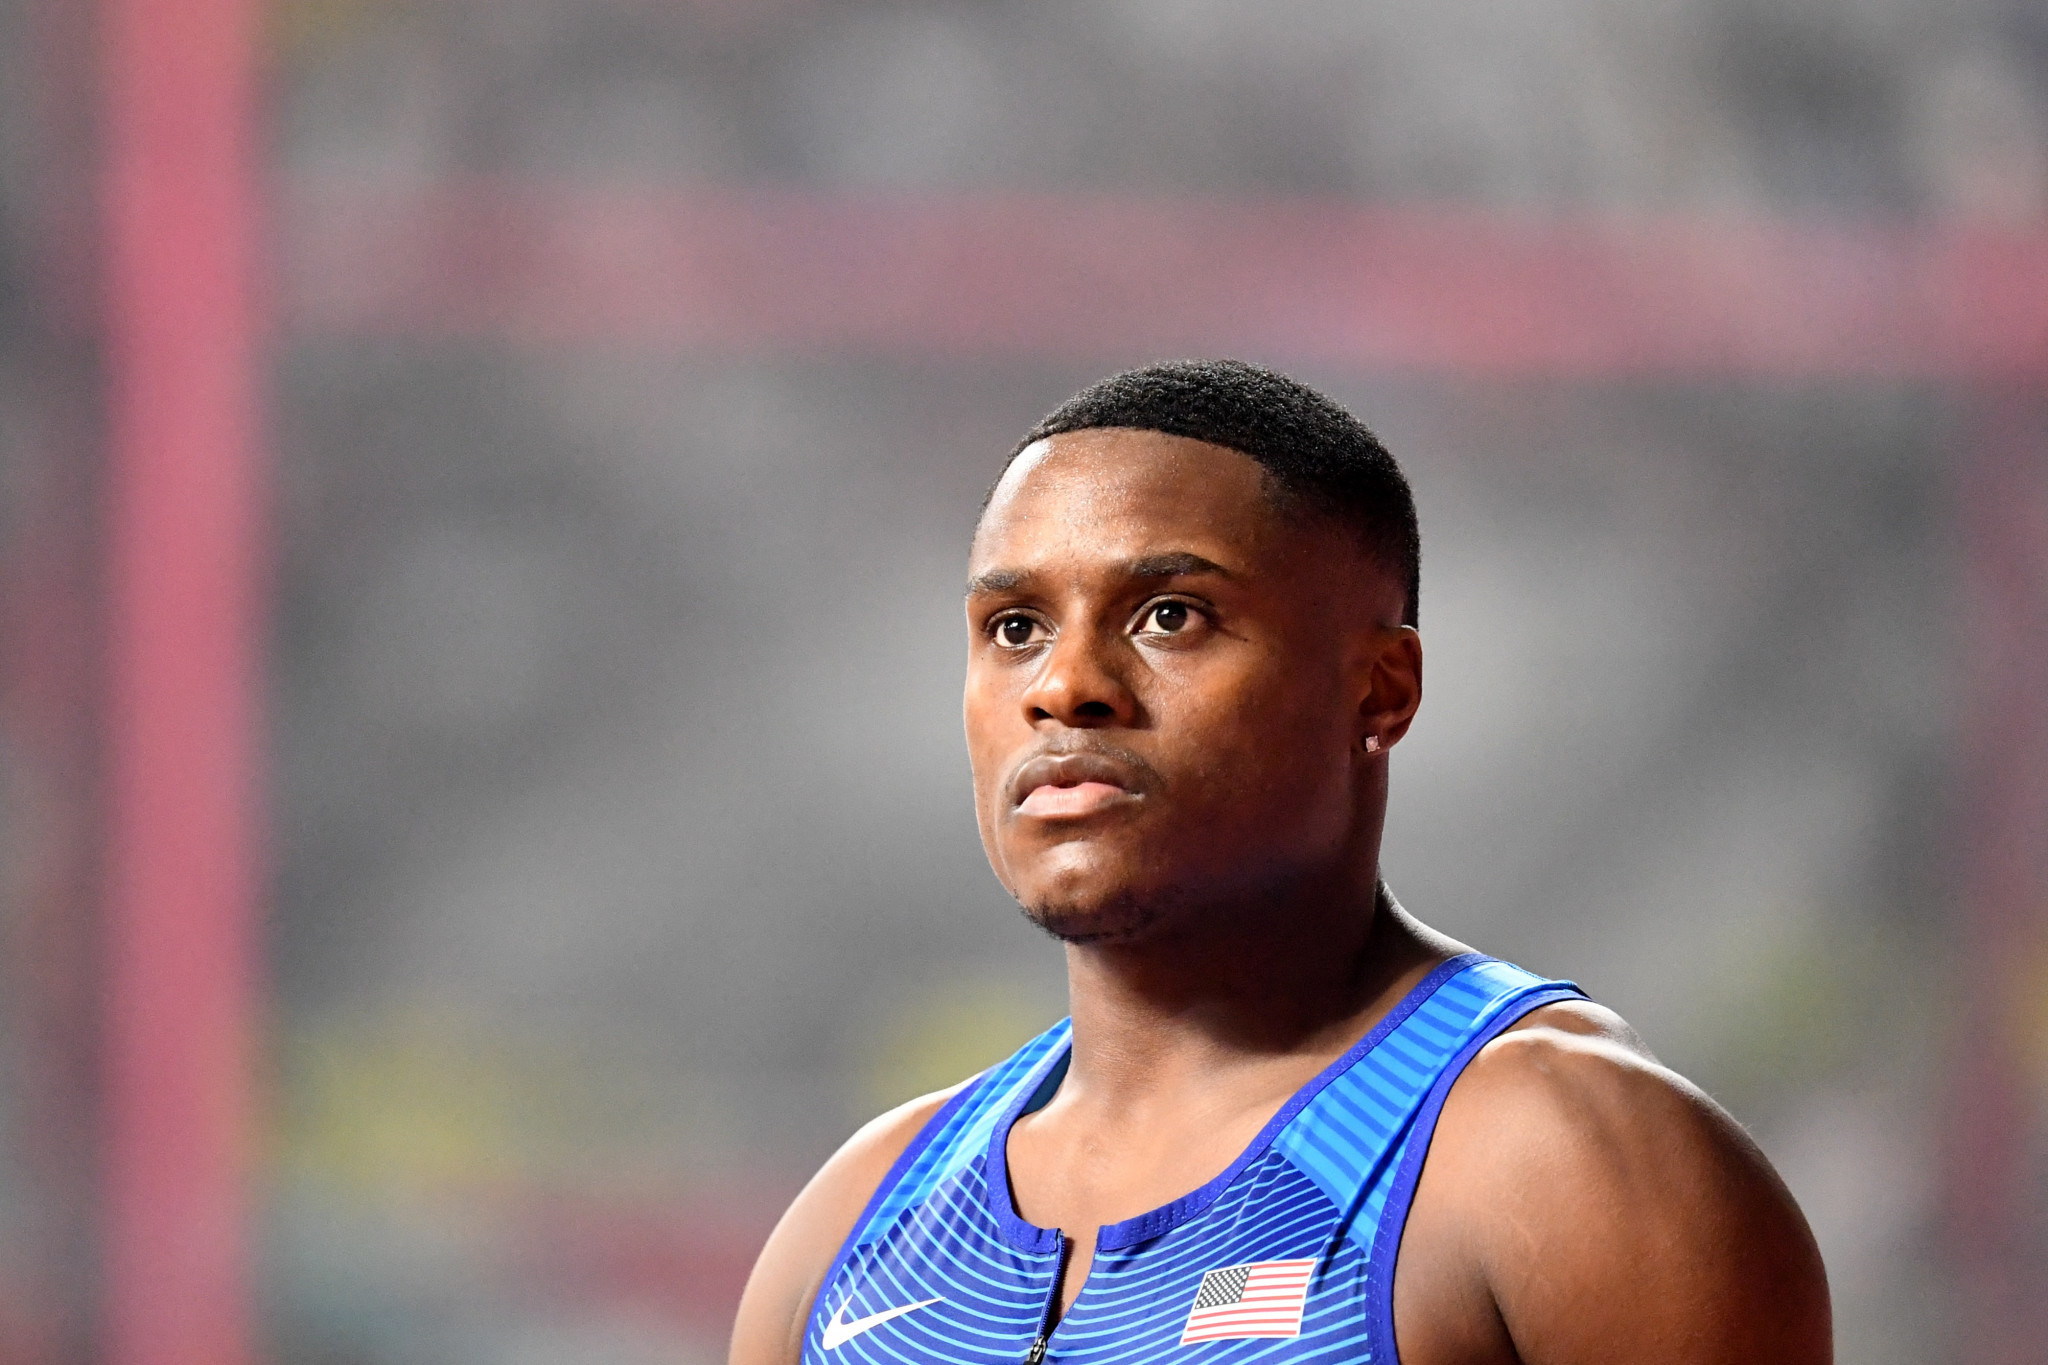 Christian Coleman will miss out on Tokyo 2020 after receiving a two-year suspension from the AIU ©Getty Images